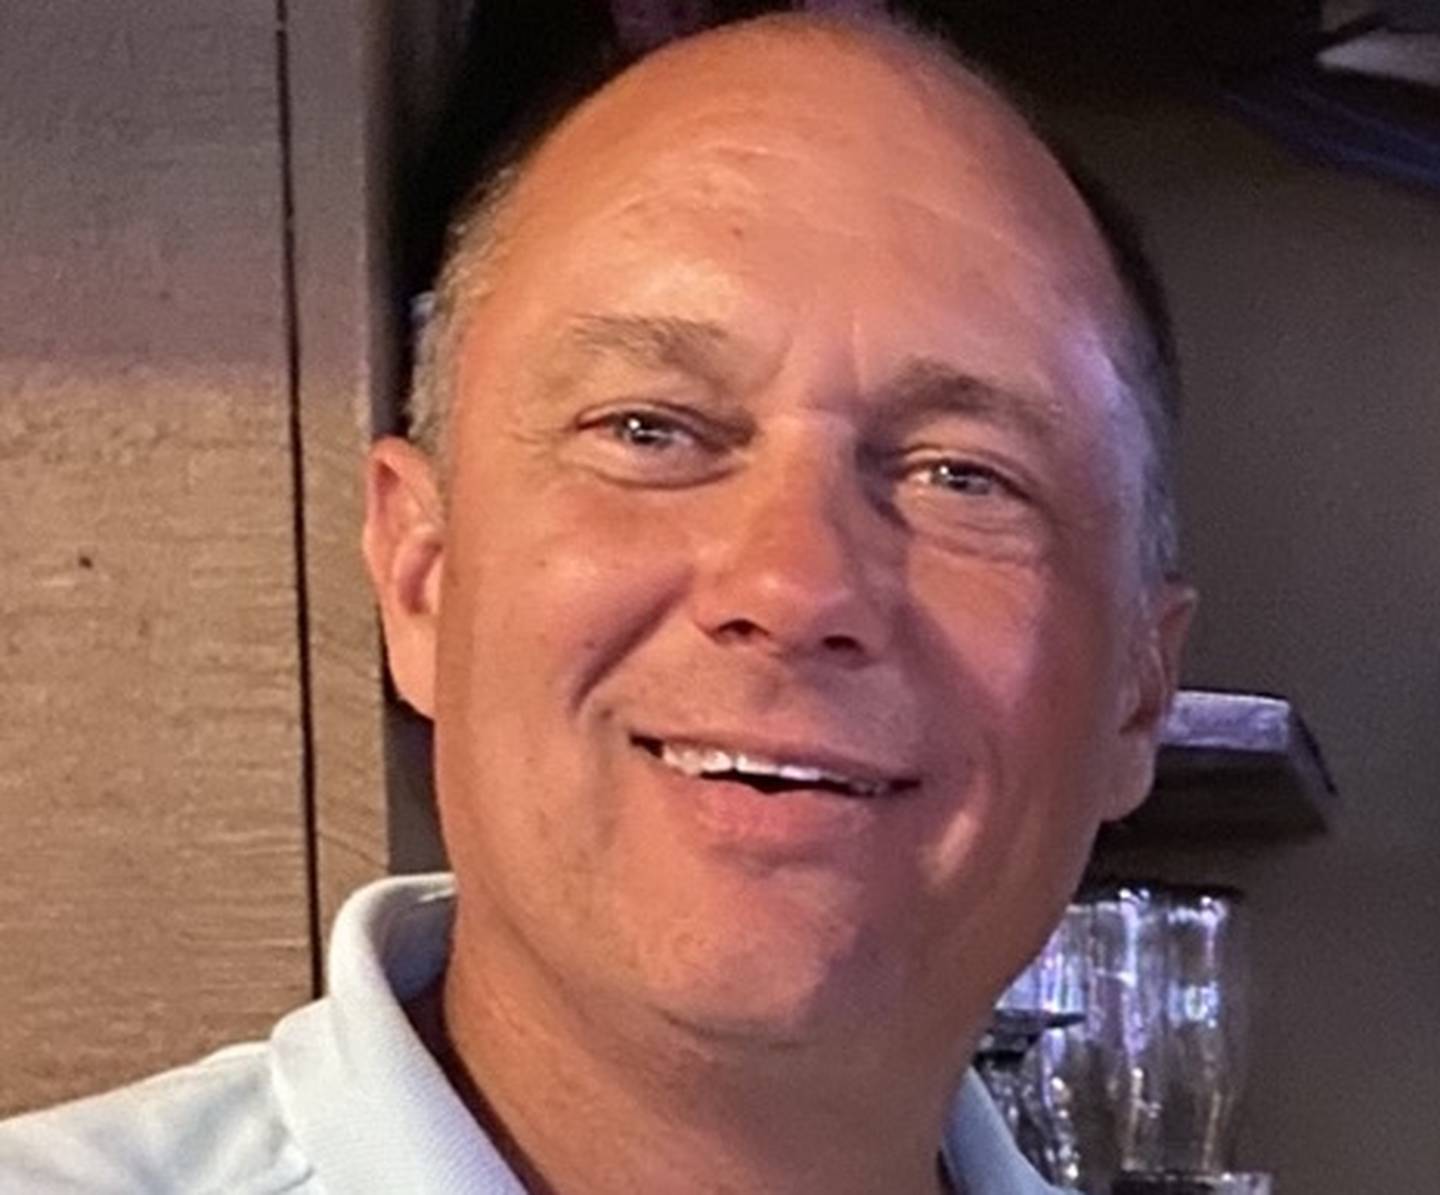 Eric Mattson, a captain in the Joliet Fire Department, is circulating petitions as a Democratic candidate in the June 28, 2022 primary for the 43rd District state senate seat.